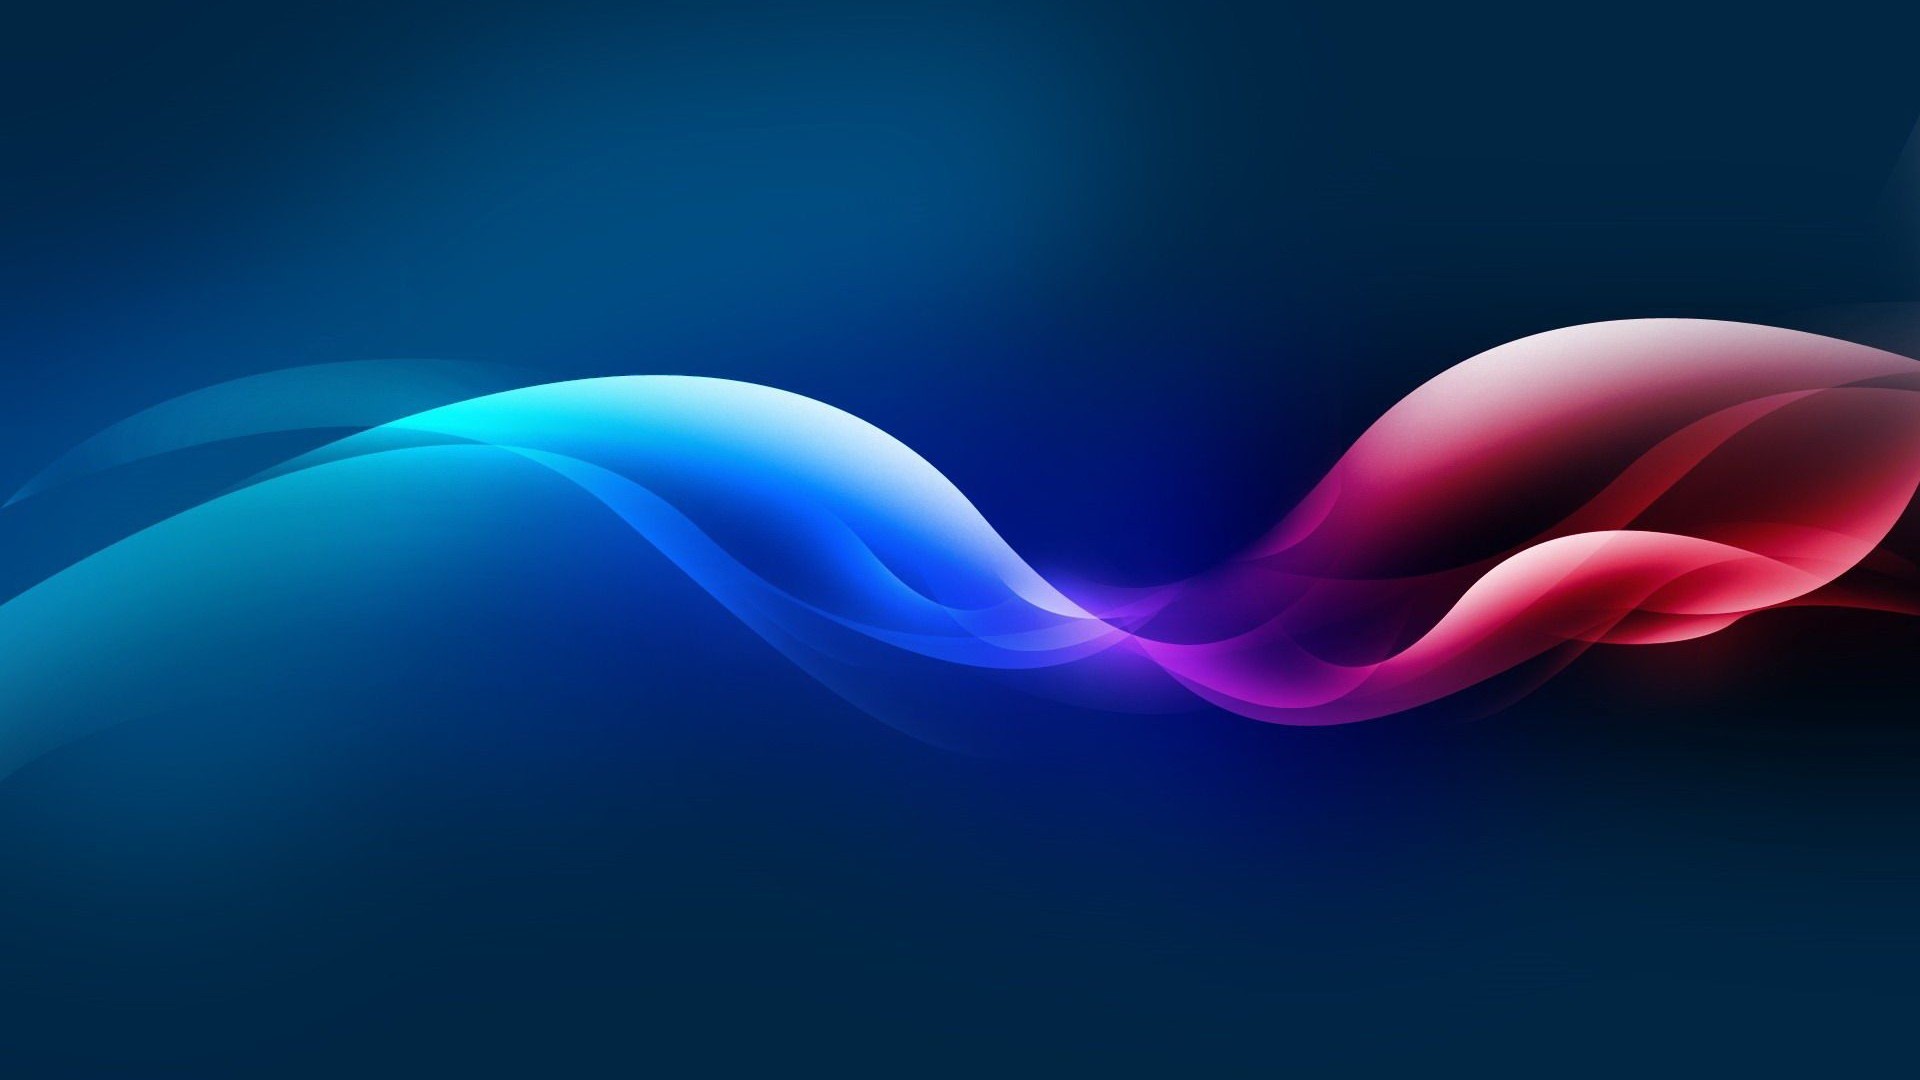 Abstract Light 3093 Hd Wallpapers in Abstract   Imagescicom